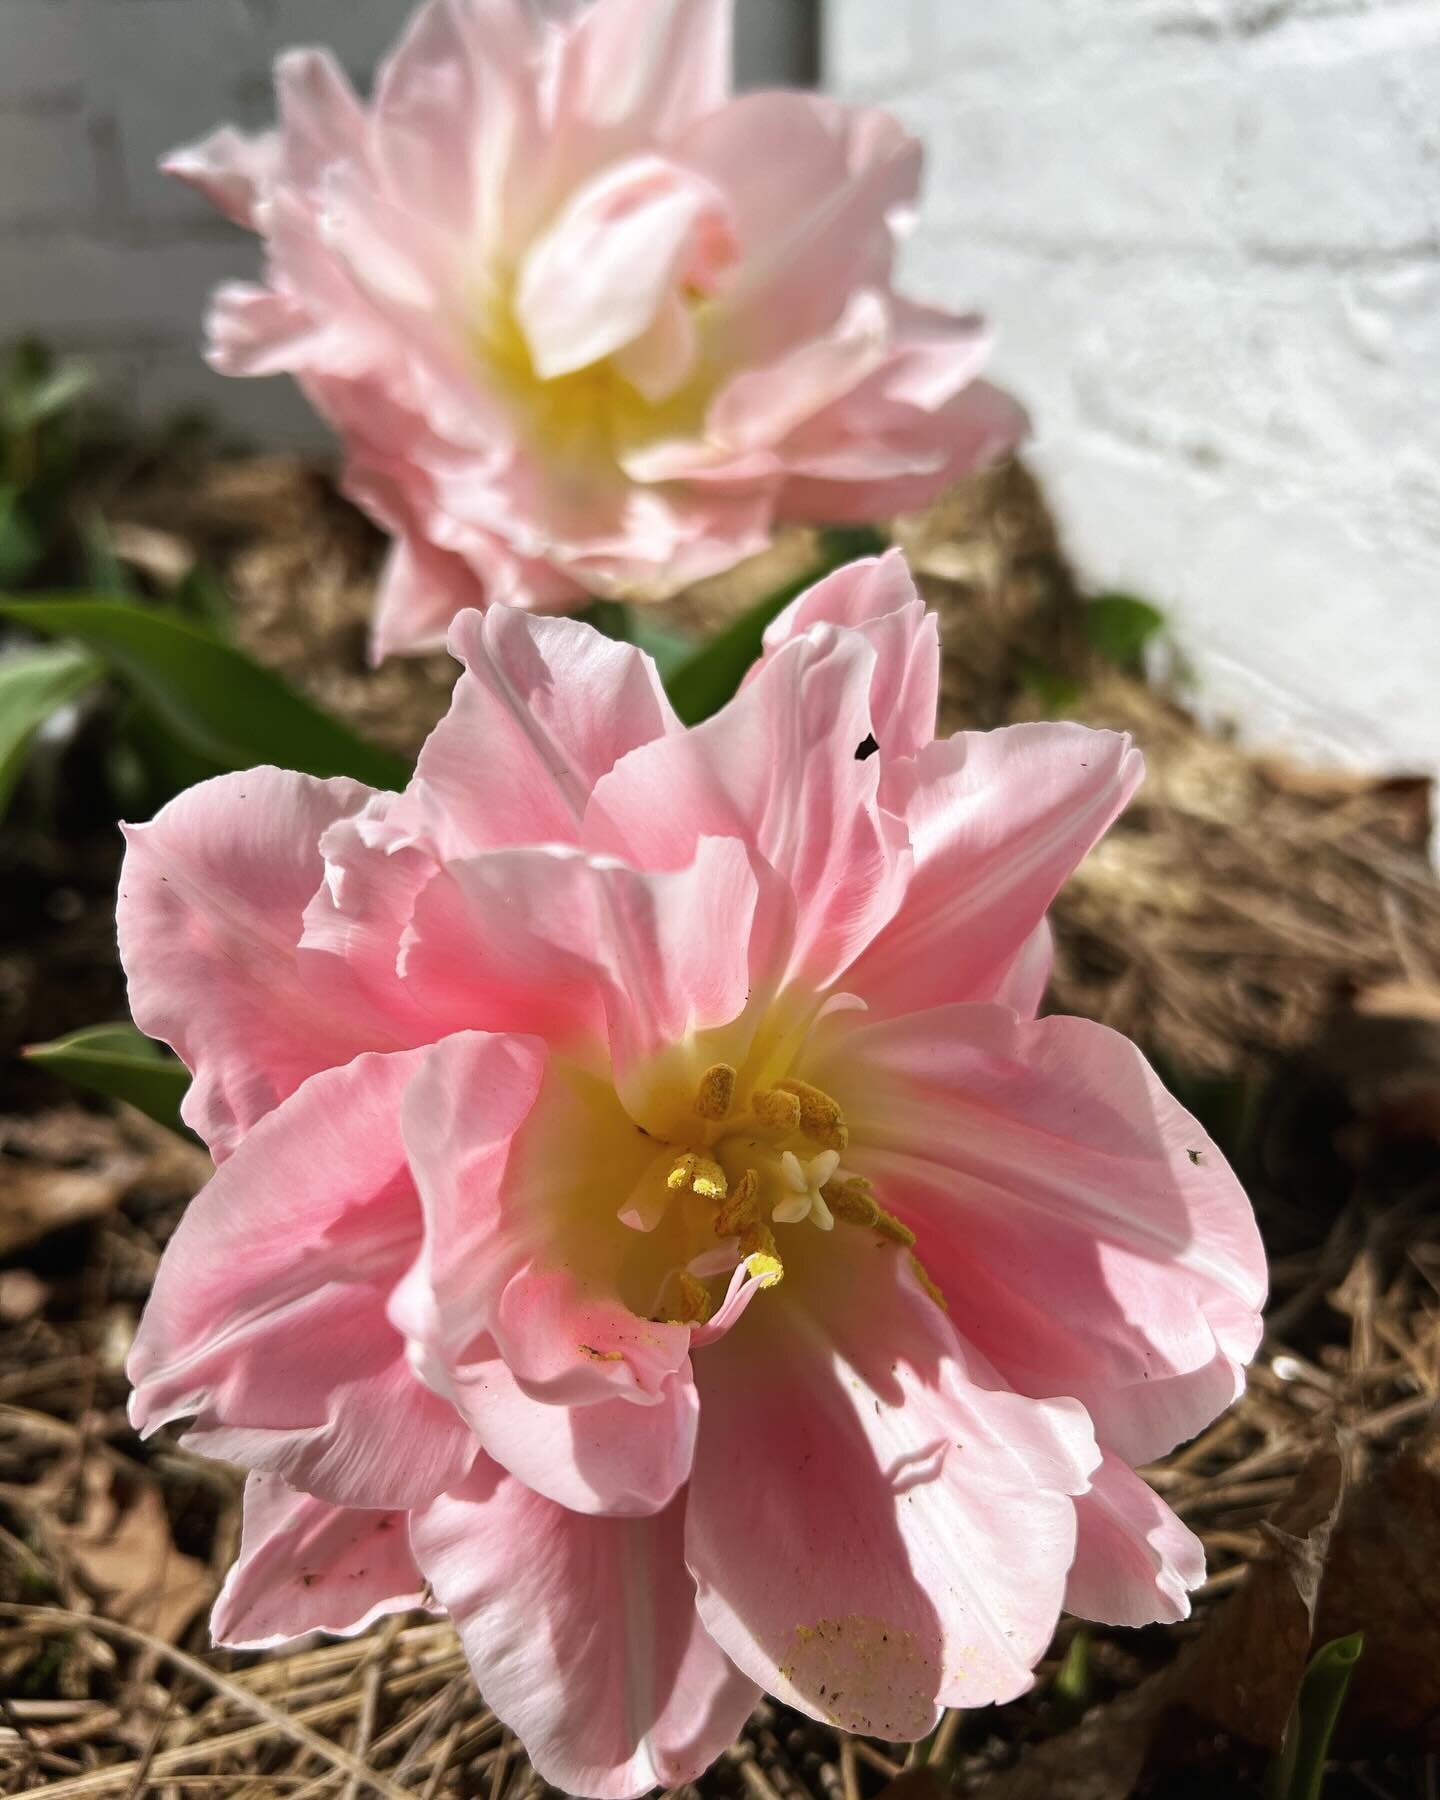 Spring bulbs are poppin up!

#springflowers #doubletulips #pink #flowerlove